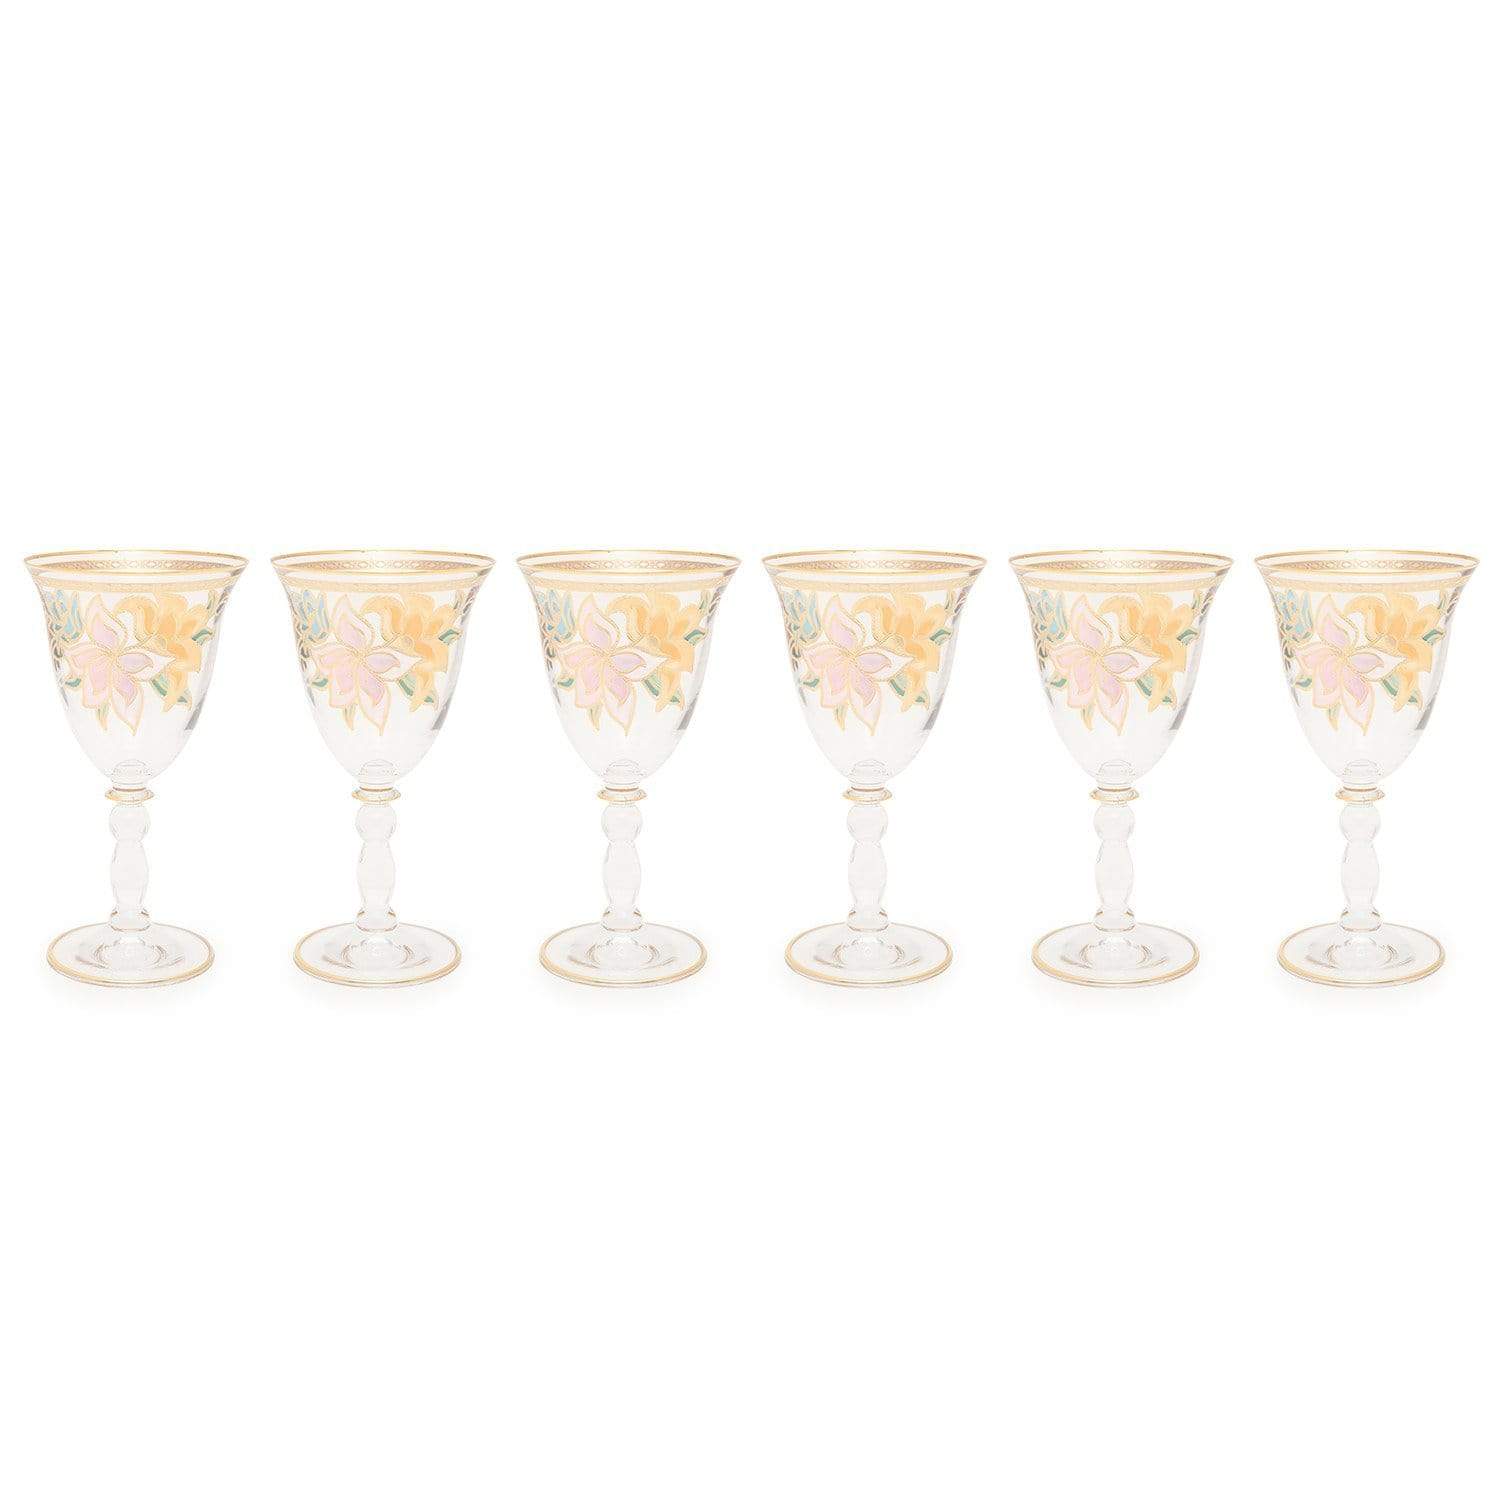 Combi Givy Goblet Set - Gold, 190 ml, Small, 6 Piece - G611Z/97 - Jashanmal Home